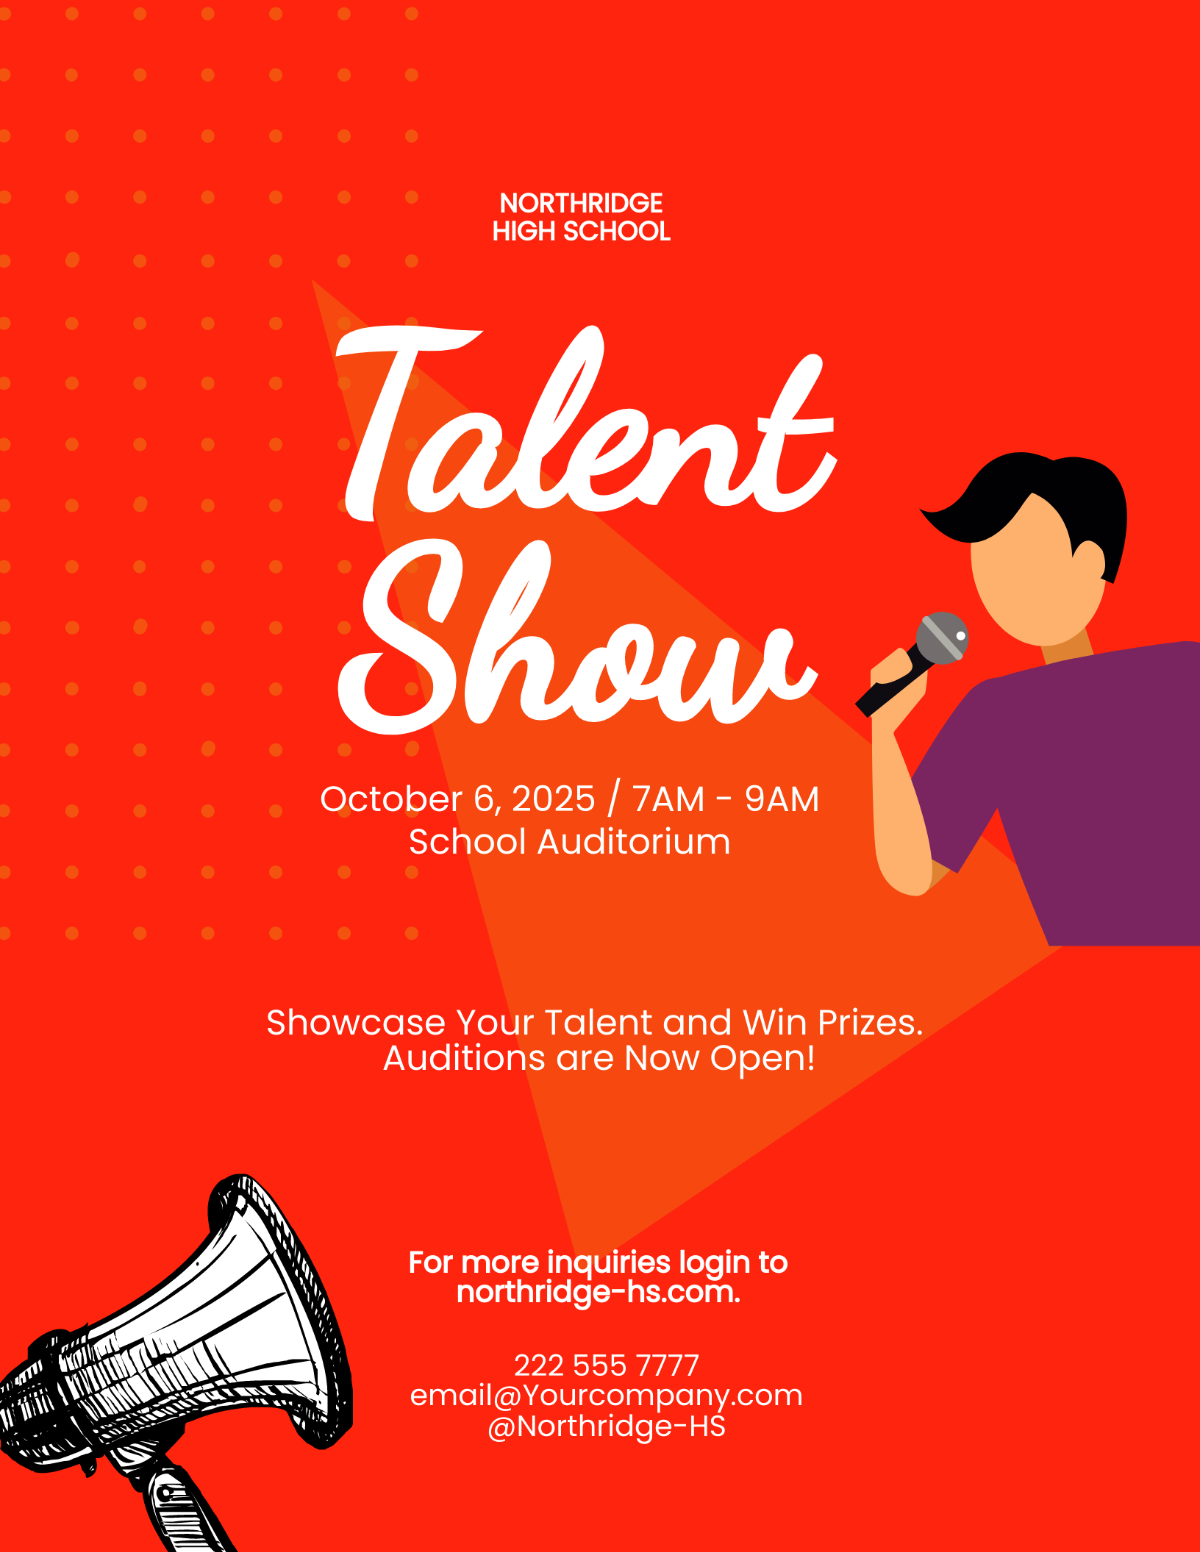 Free Talent Show Audition Flyer Template